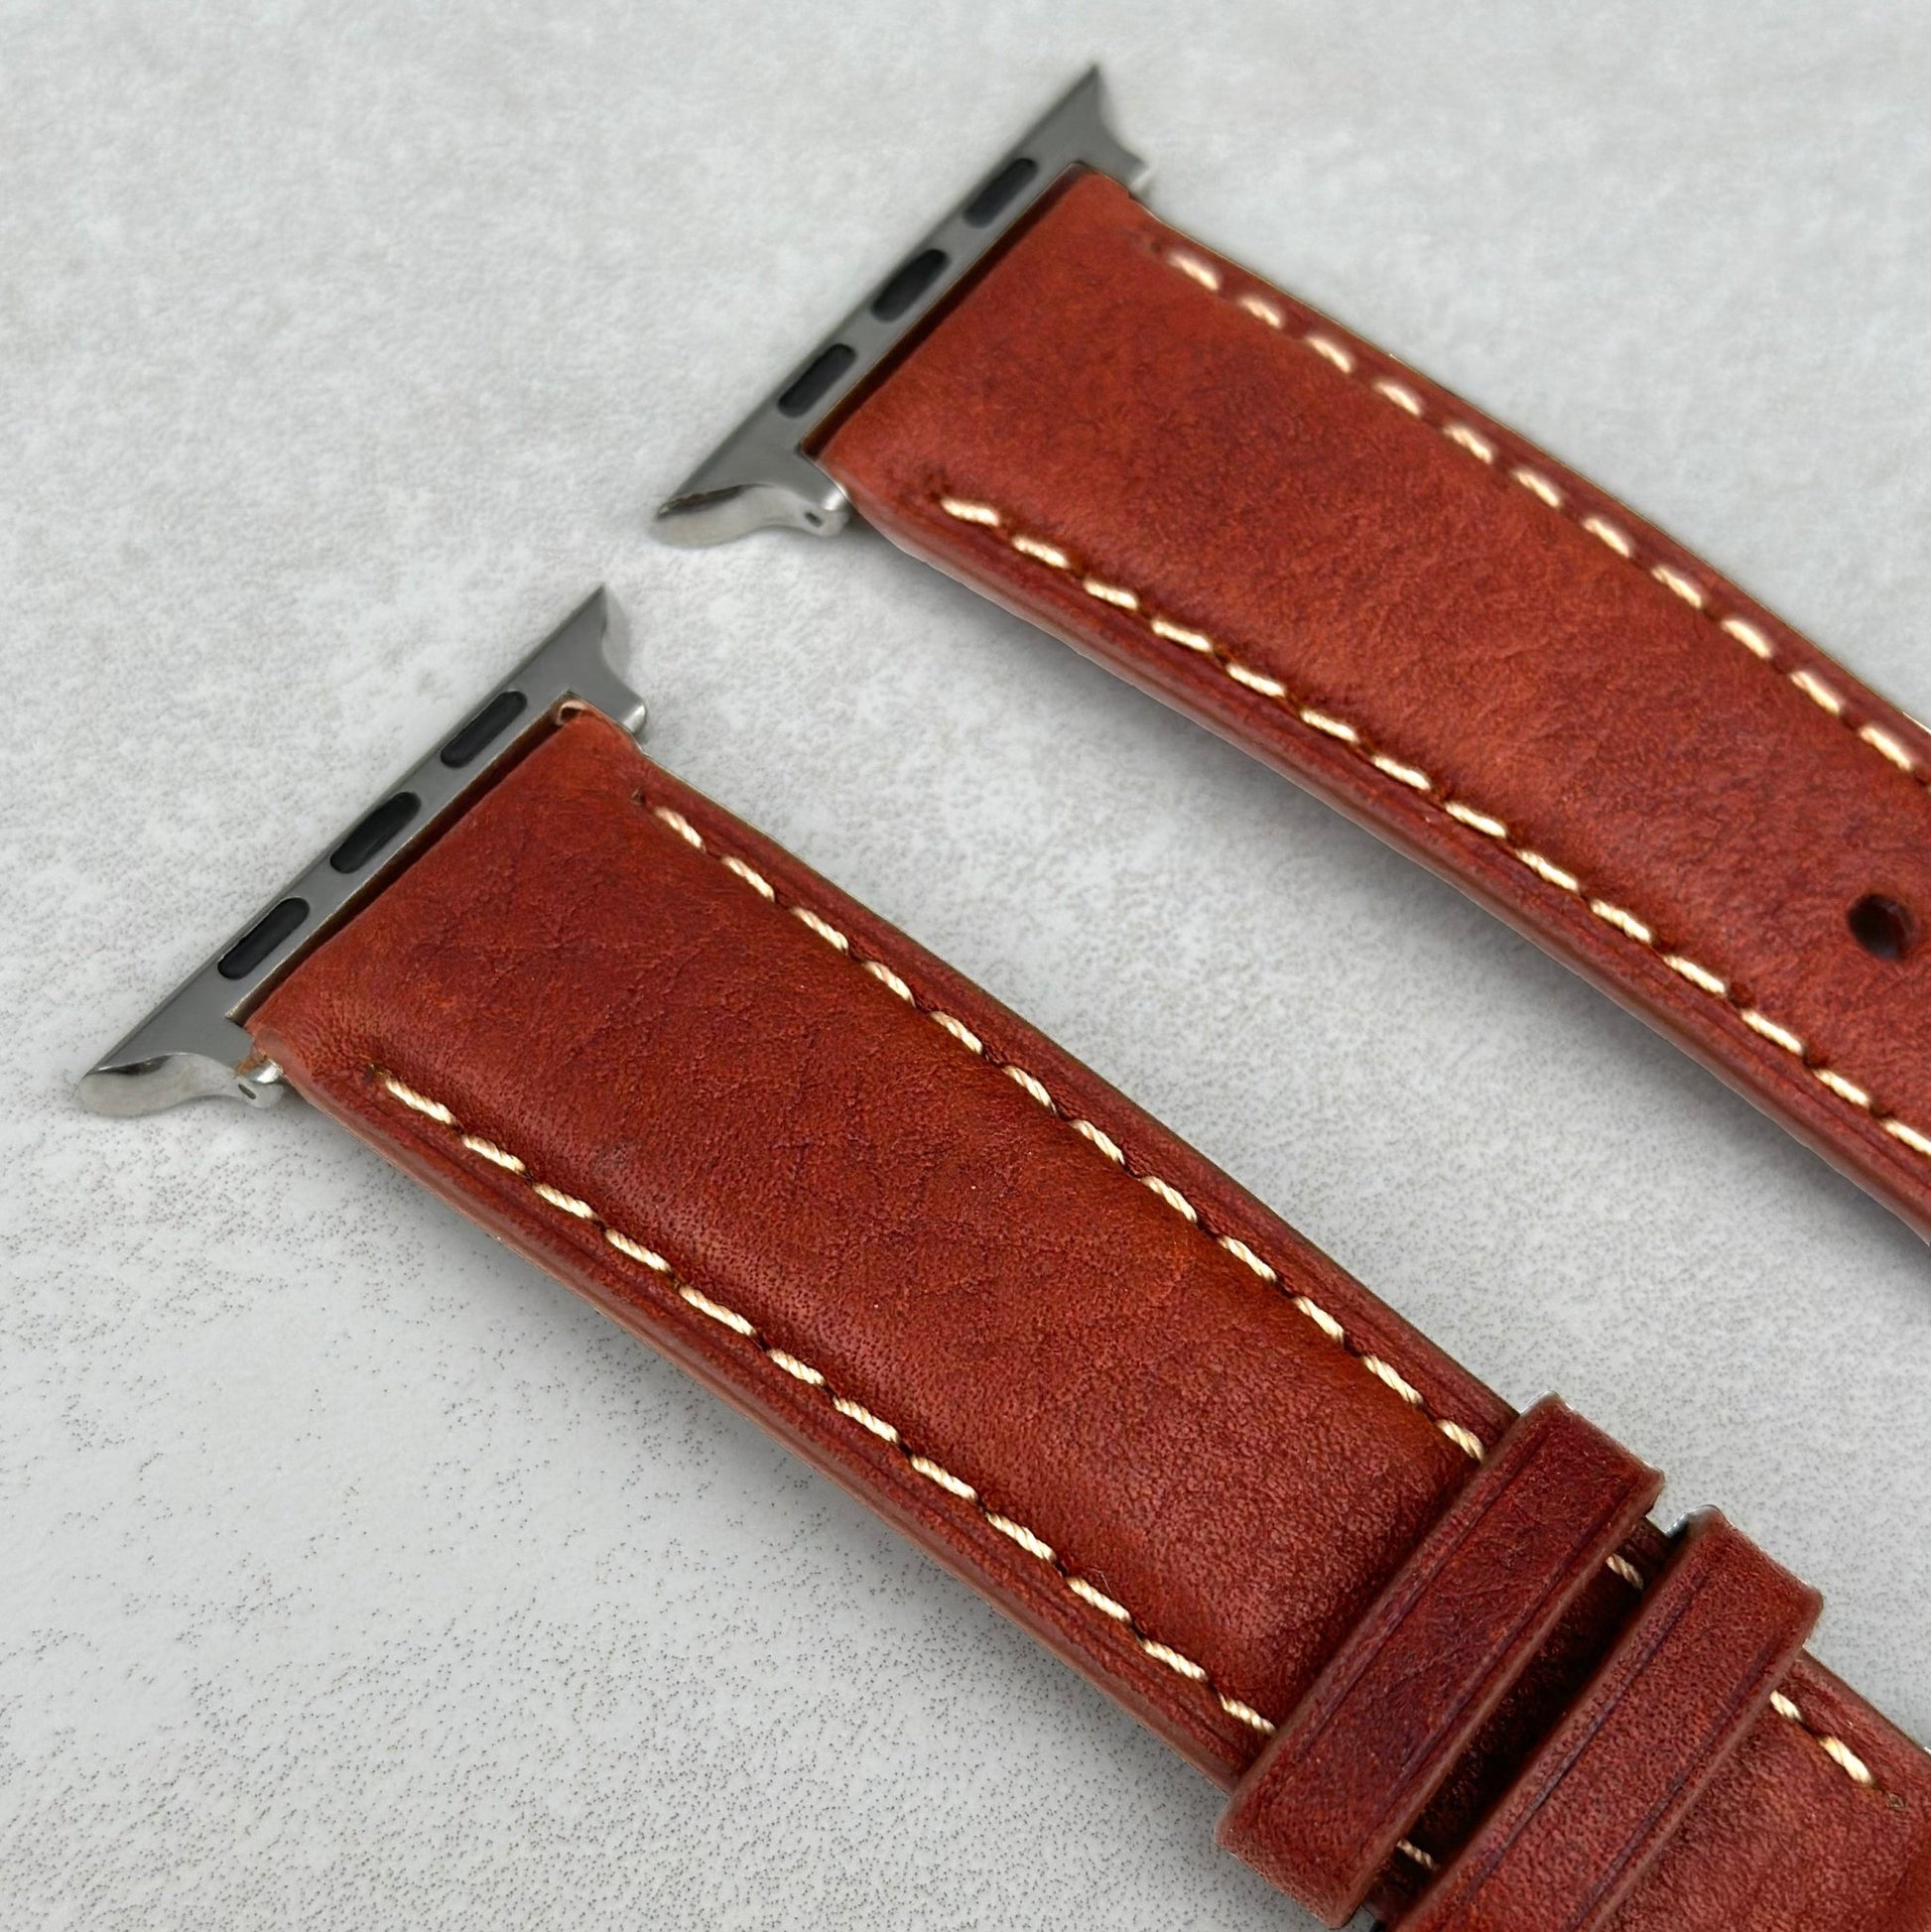 Top of the Terracotta brown Italian leather Apple Watch strap. Contrast ivory stitching. Watch And Strap